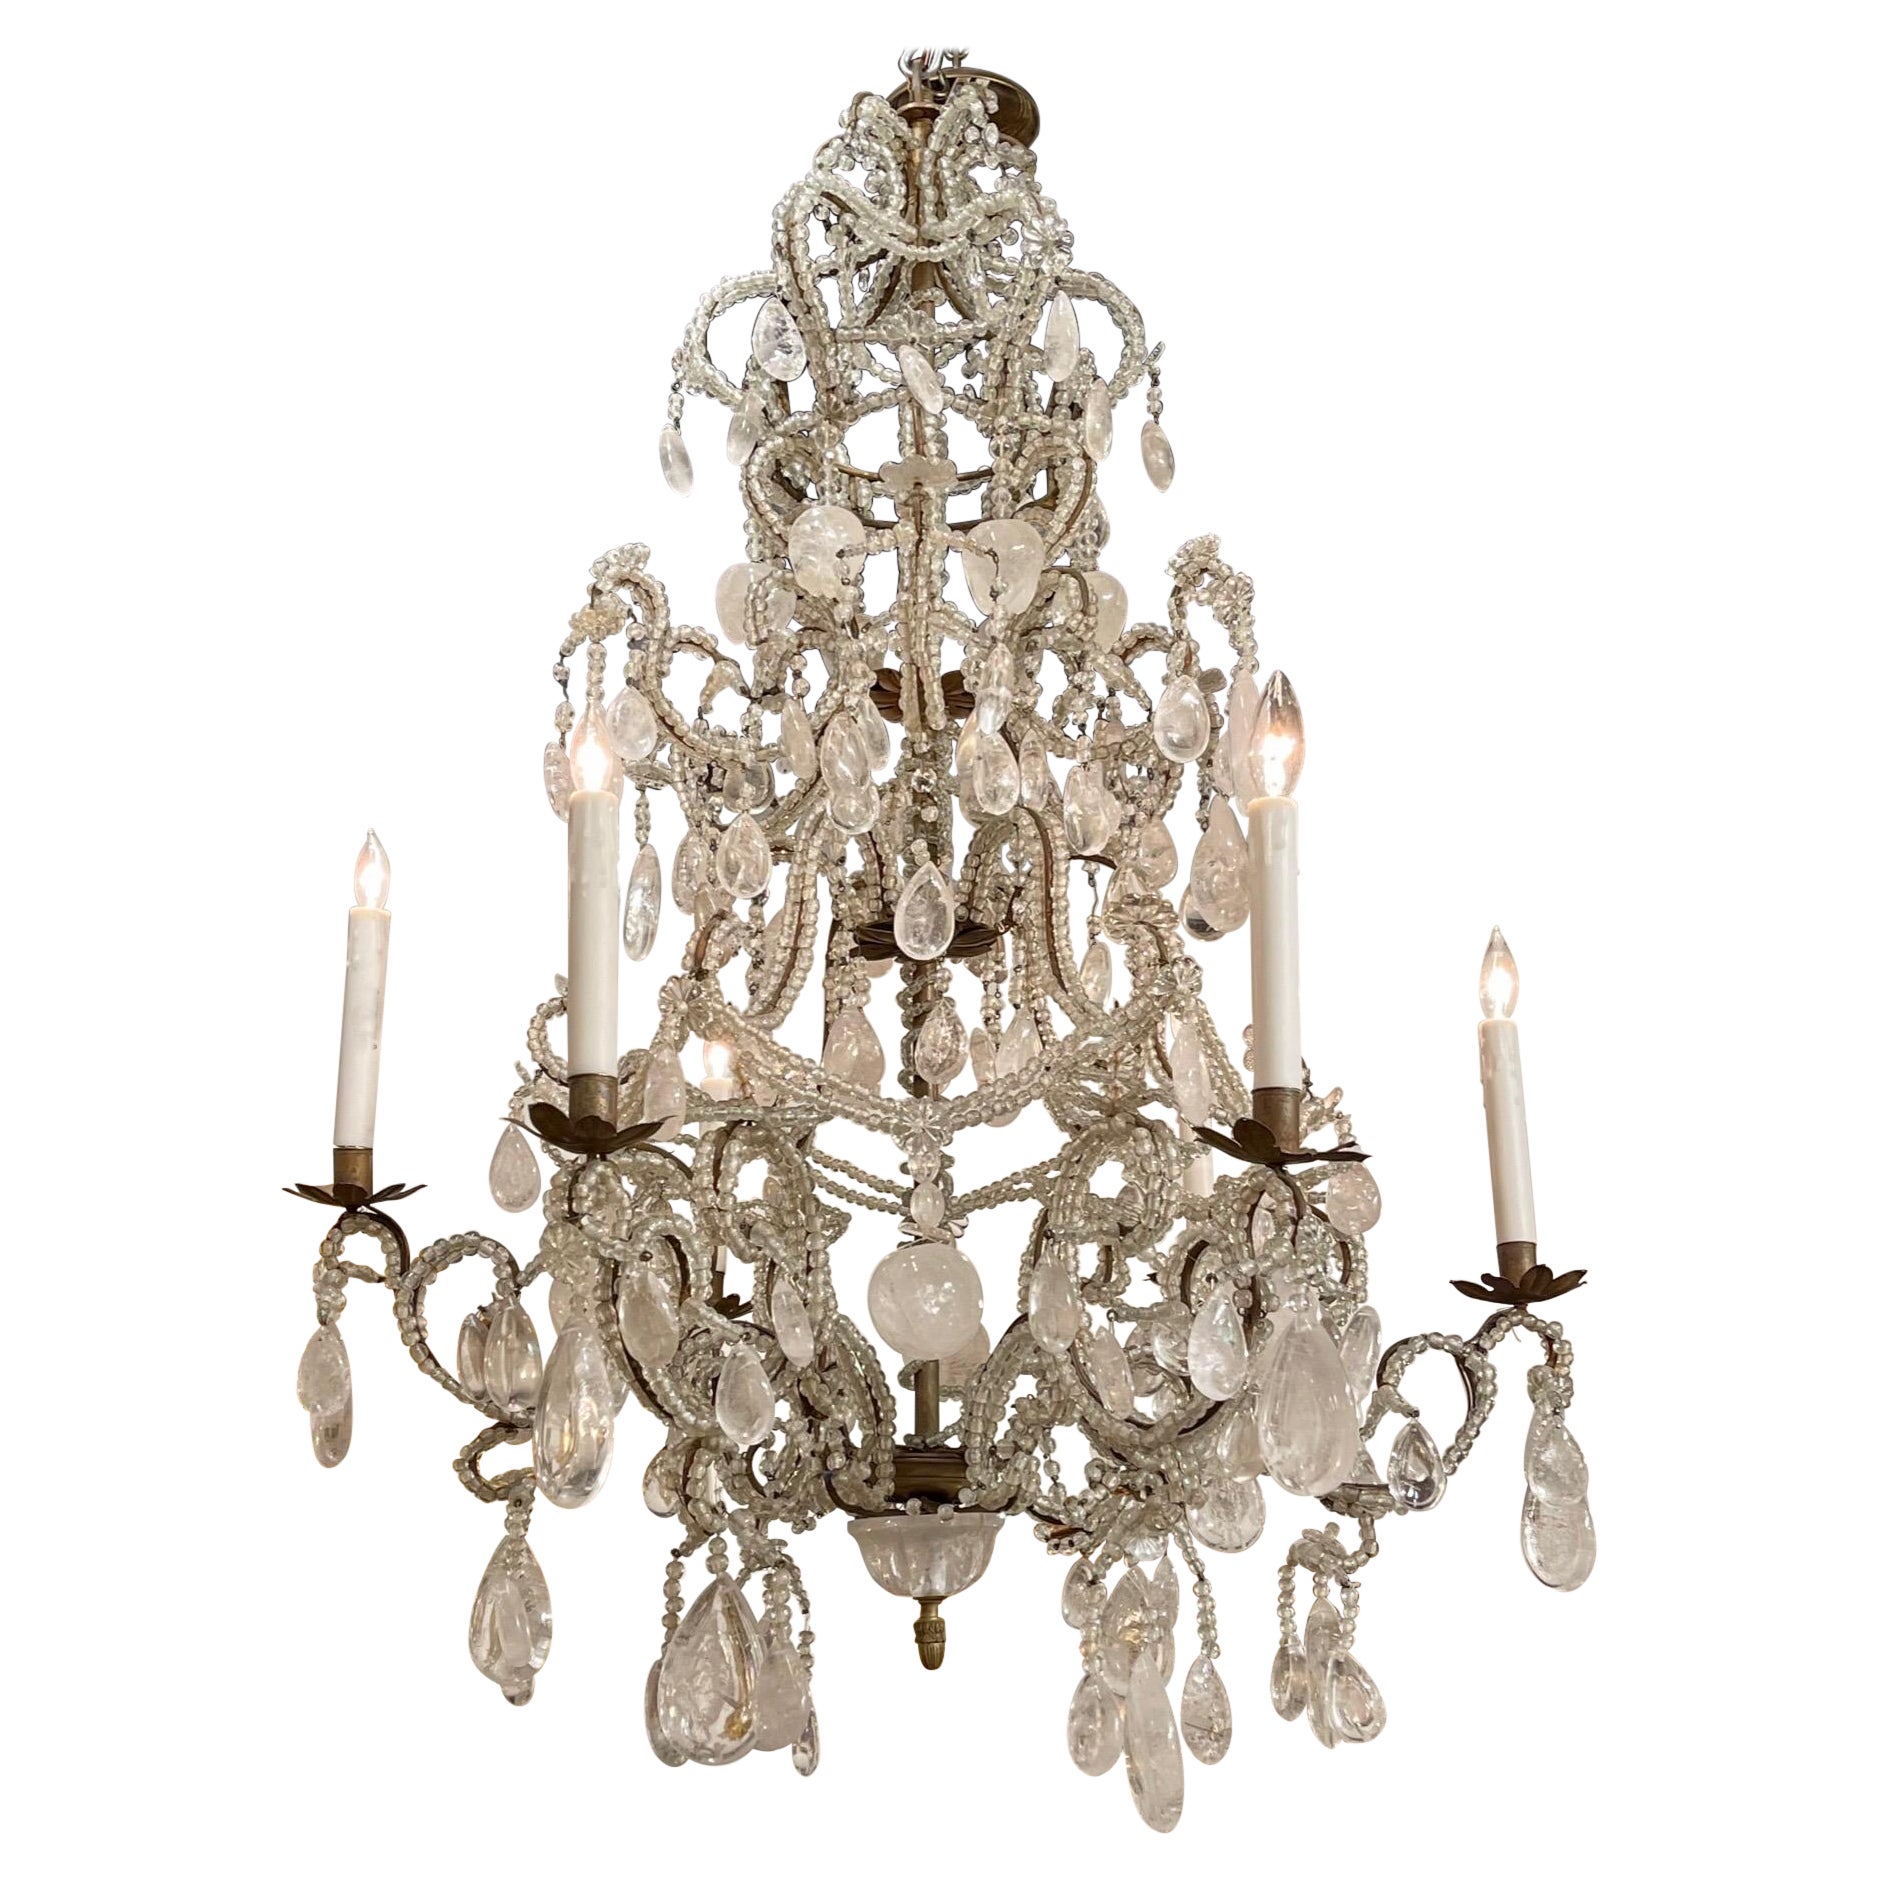 19th Century French Rock Crystal Chandelier with 6 Lights For Sale